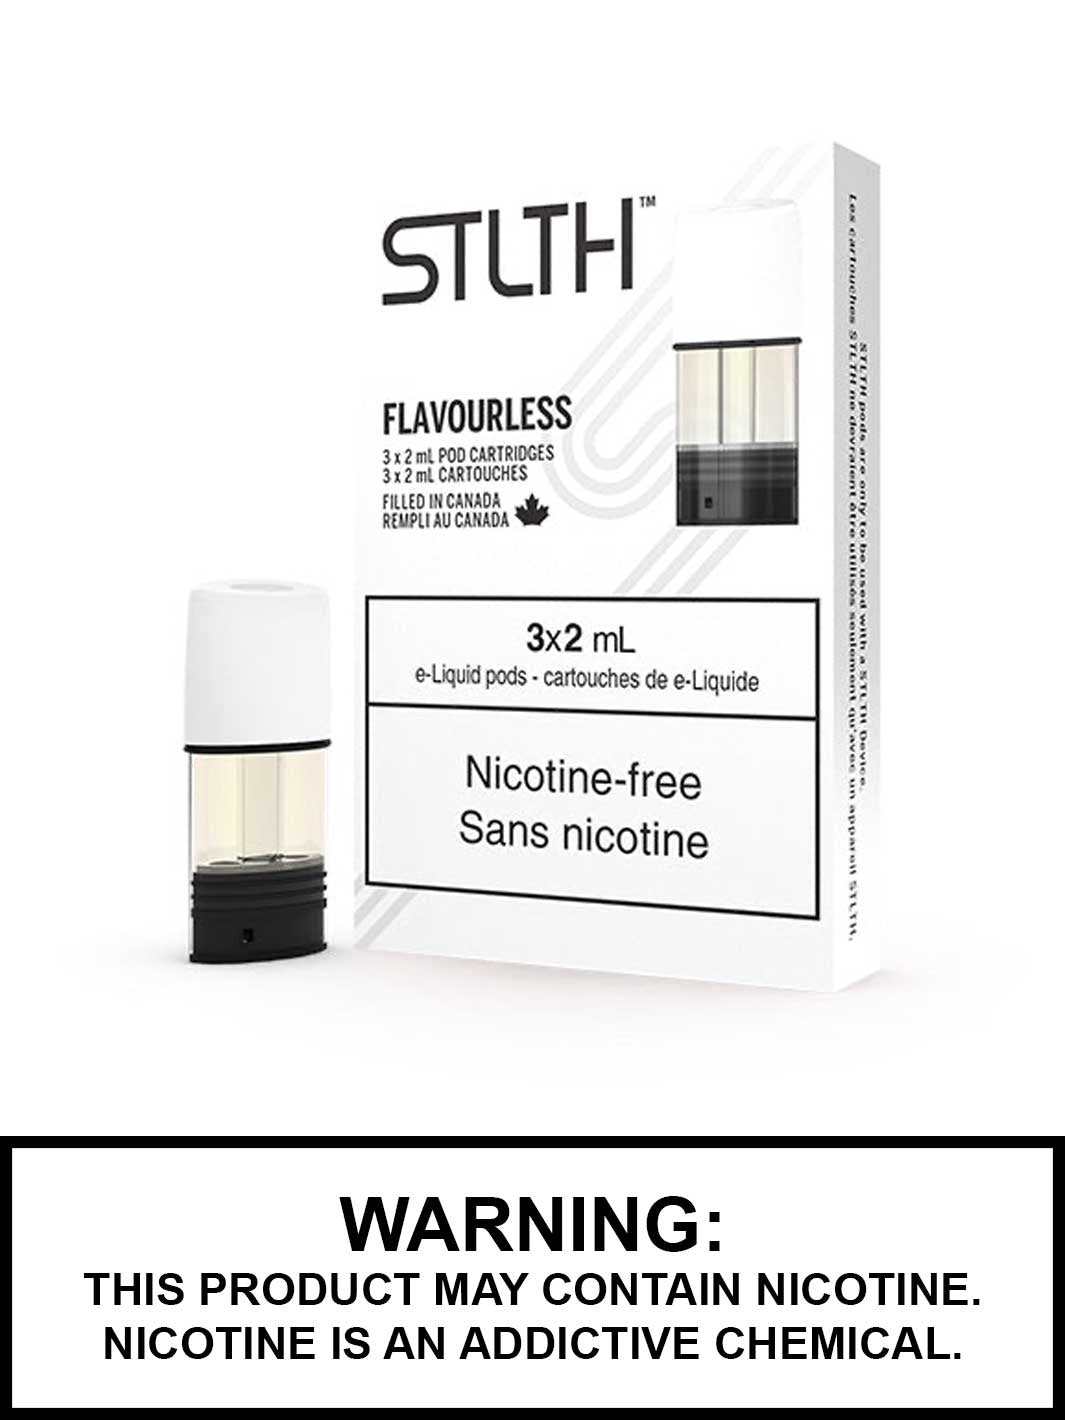 Flavourless STLTH Pods Nicotine Free Canada, Flavourless eJuice, Vape360